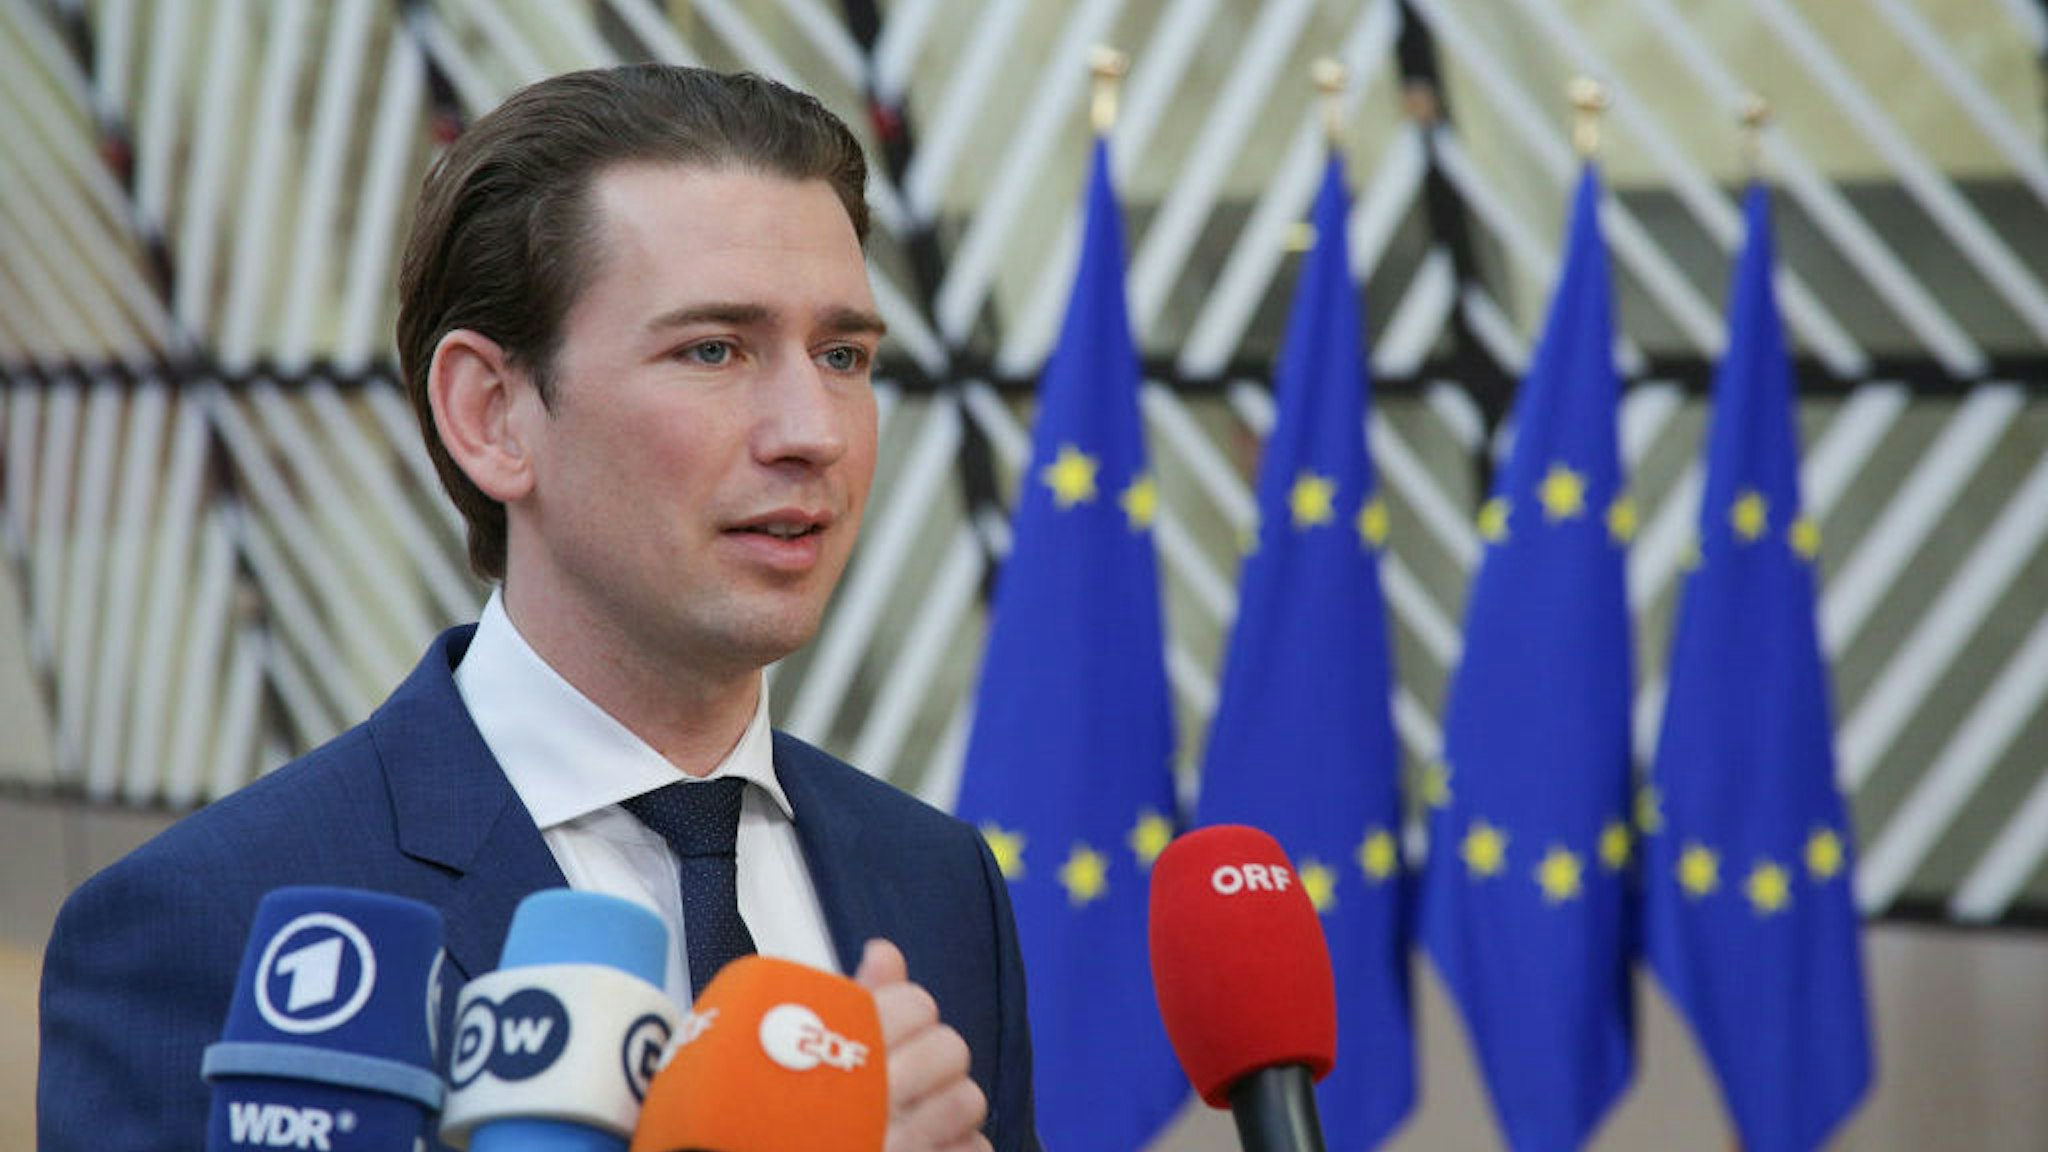 Sebastian Kurz, the Federal Chancellor of Austria as seen arriving at the European Council . Sebastian Kurz attends the EUCO, walking in Forum Europa building on the red carpet with the European flags, having a doorstep statement, talking to journalists, media and press representatives for the intense negotiations on the EU long term budget financial framework for 2021-2027 at a special European Council, EURO summit, EU leaders meeting in Brussels, Belgium. February 20, 2020 (Photo by Nicolas Economou/NurPhoto)